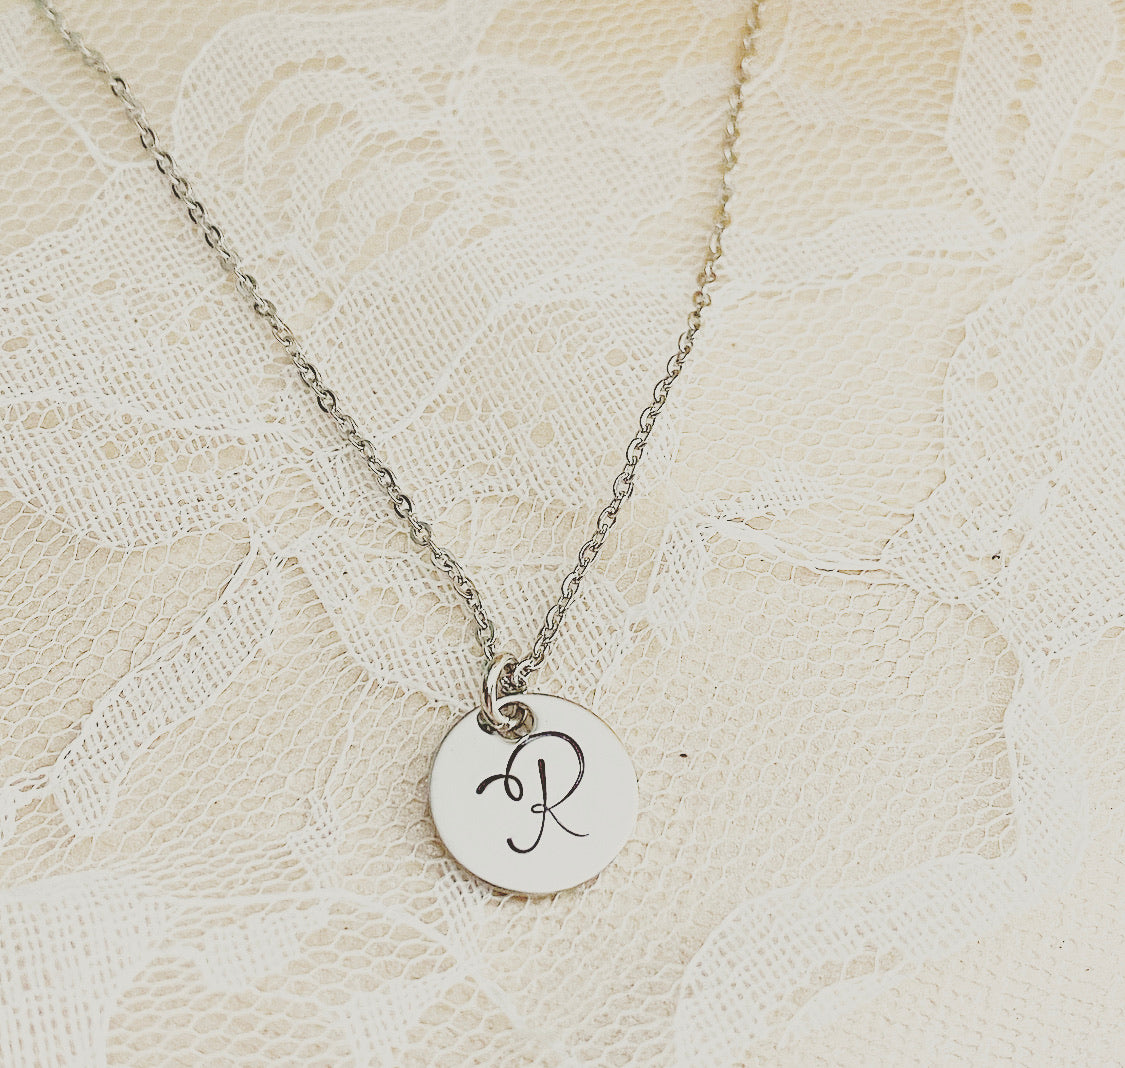 SMALL-INITIAL DISK NECKLACE